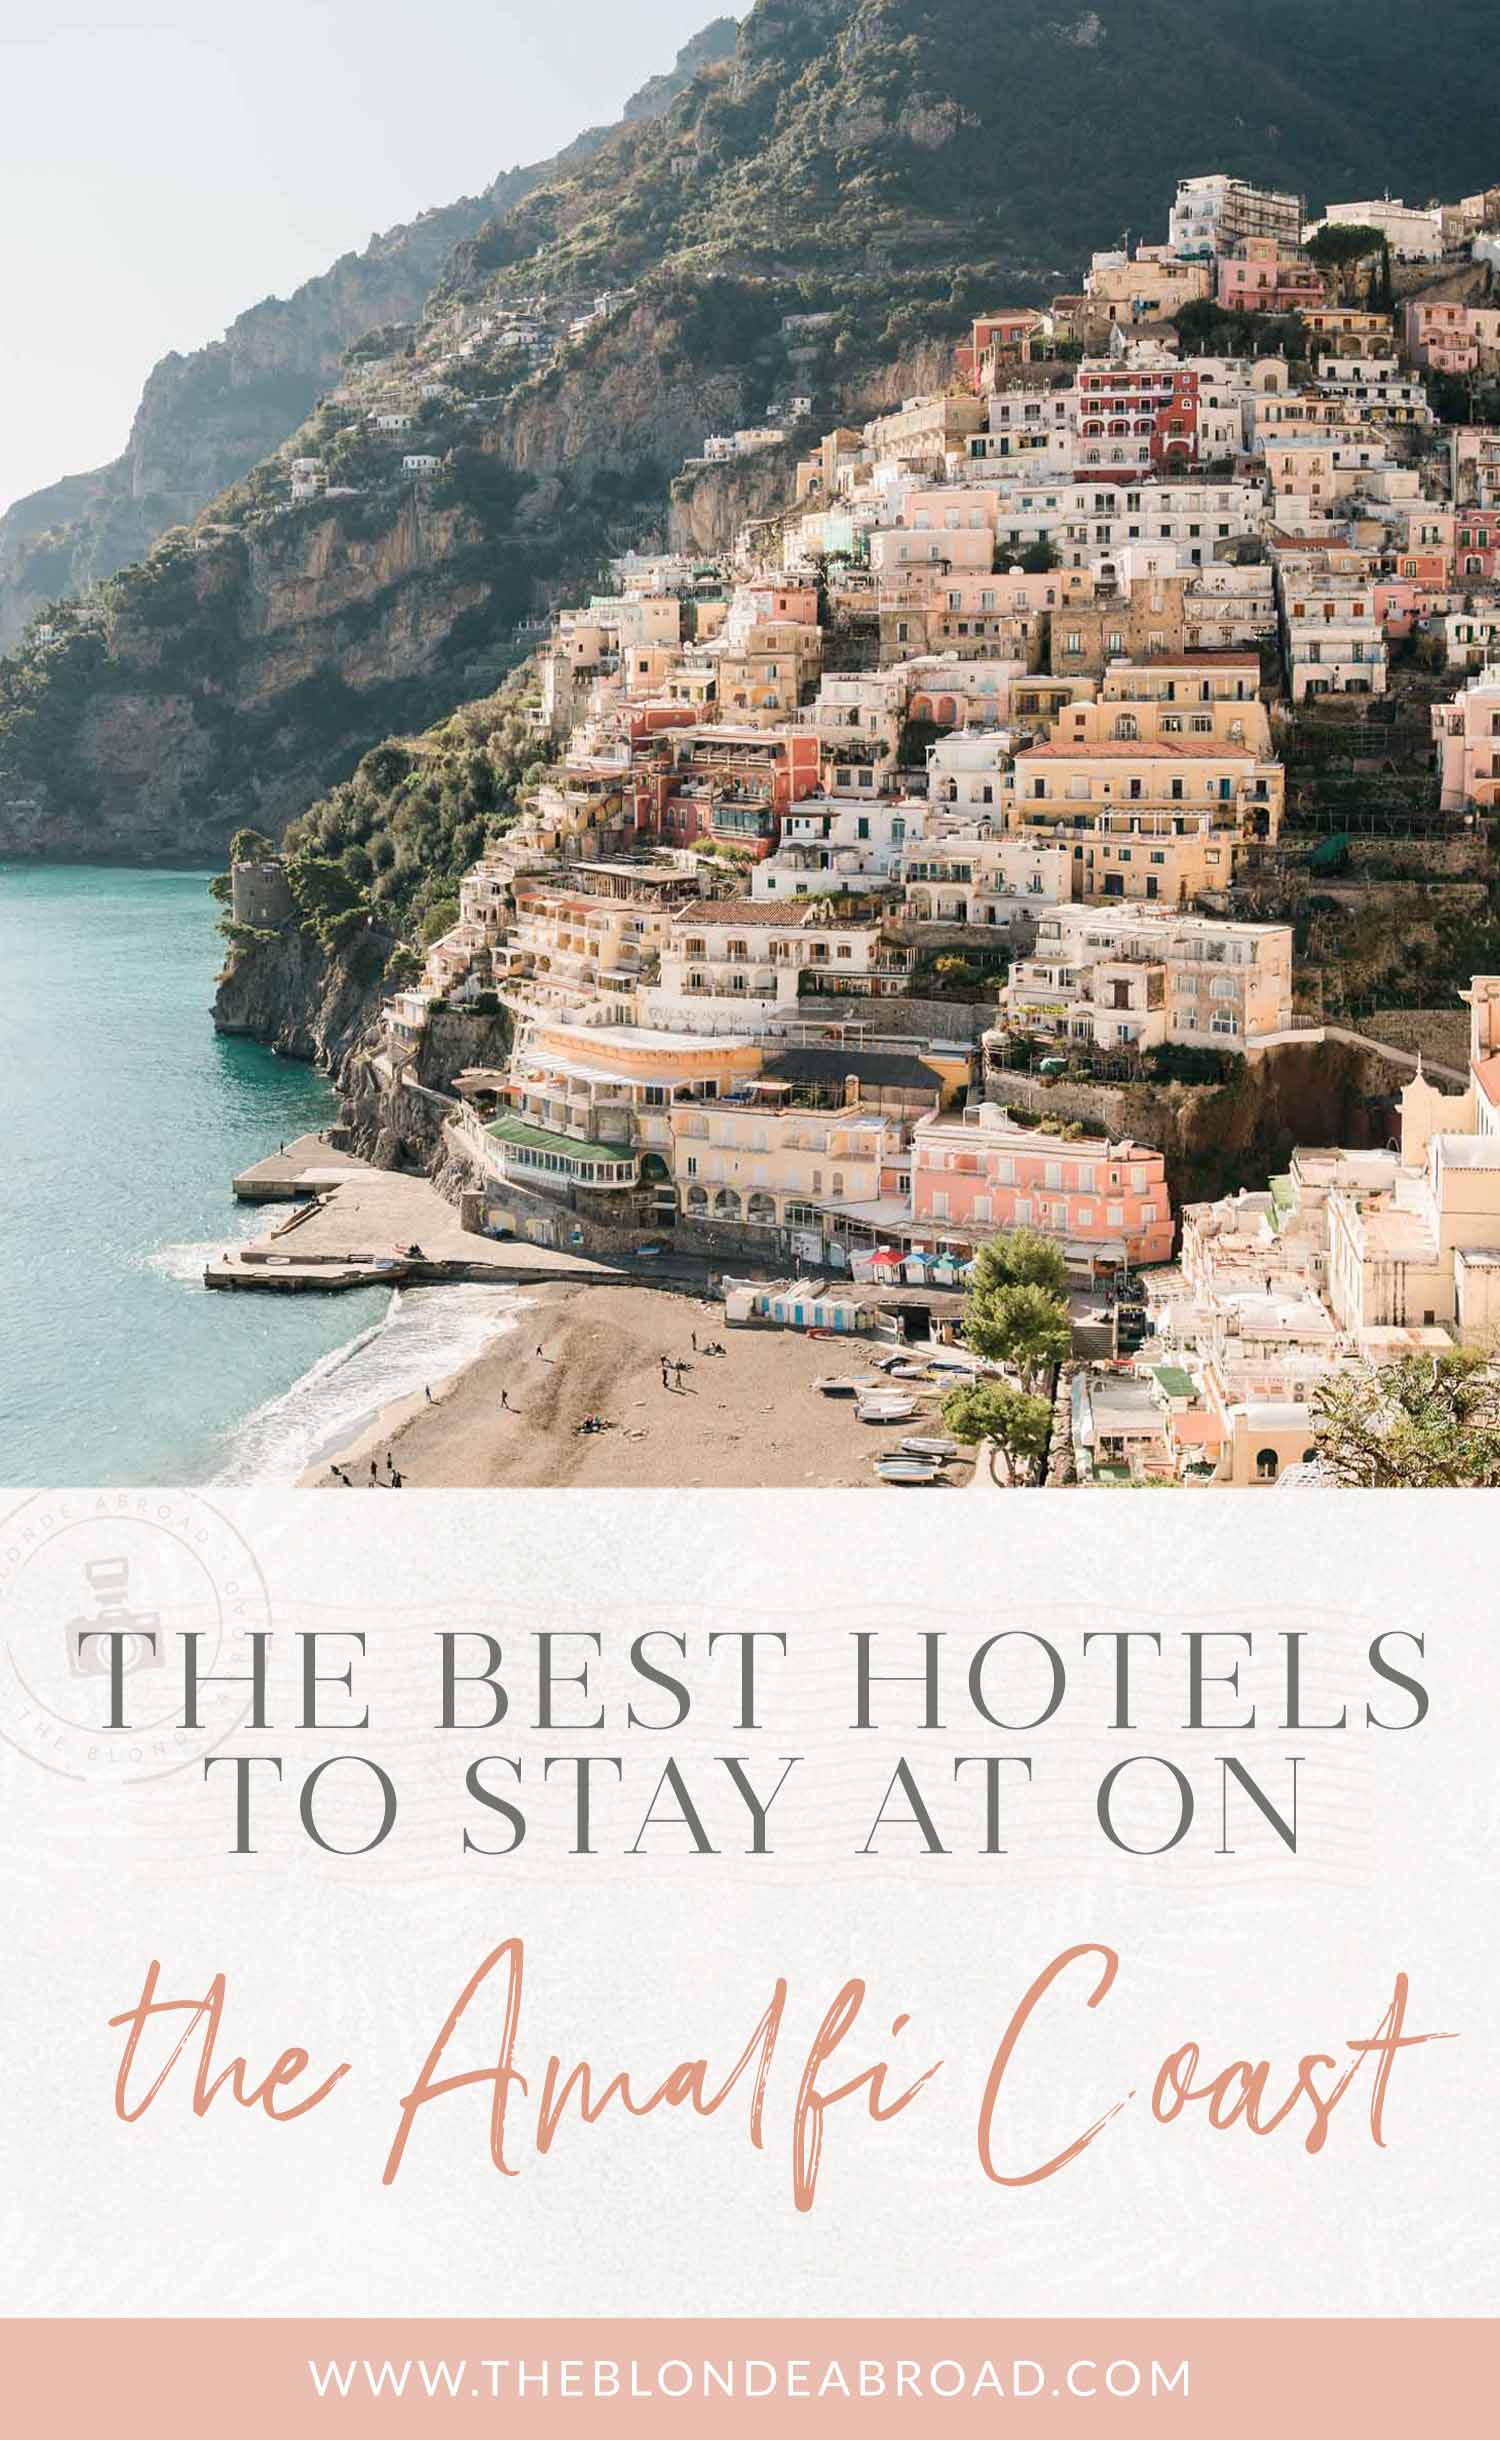 Best Hotels to Stay at On Amalfi Coast